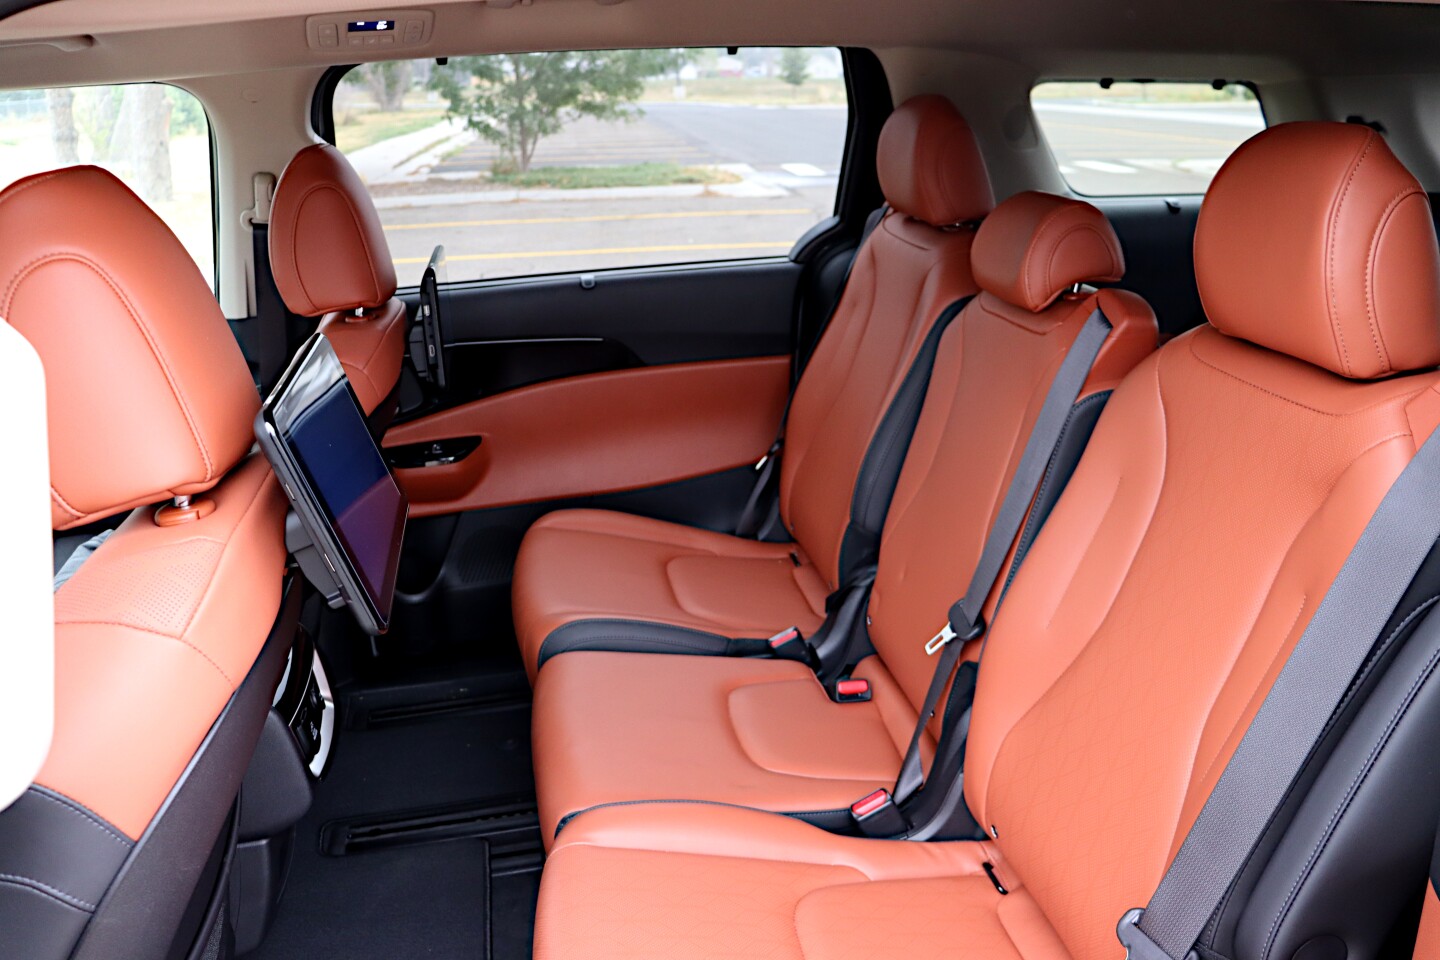 A second-row middle seat is standard in most models of the 2022 Kia Carnival, providing seating for eight in all